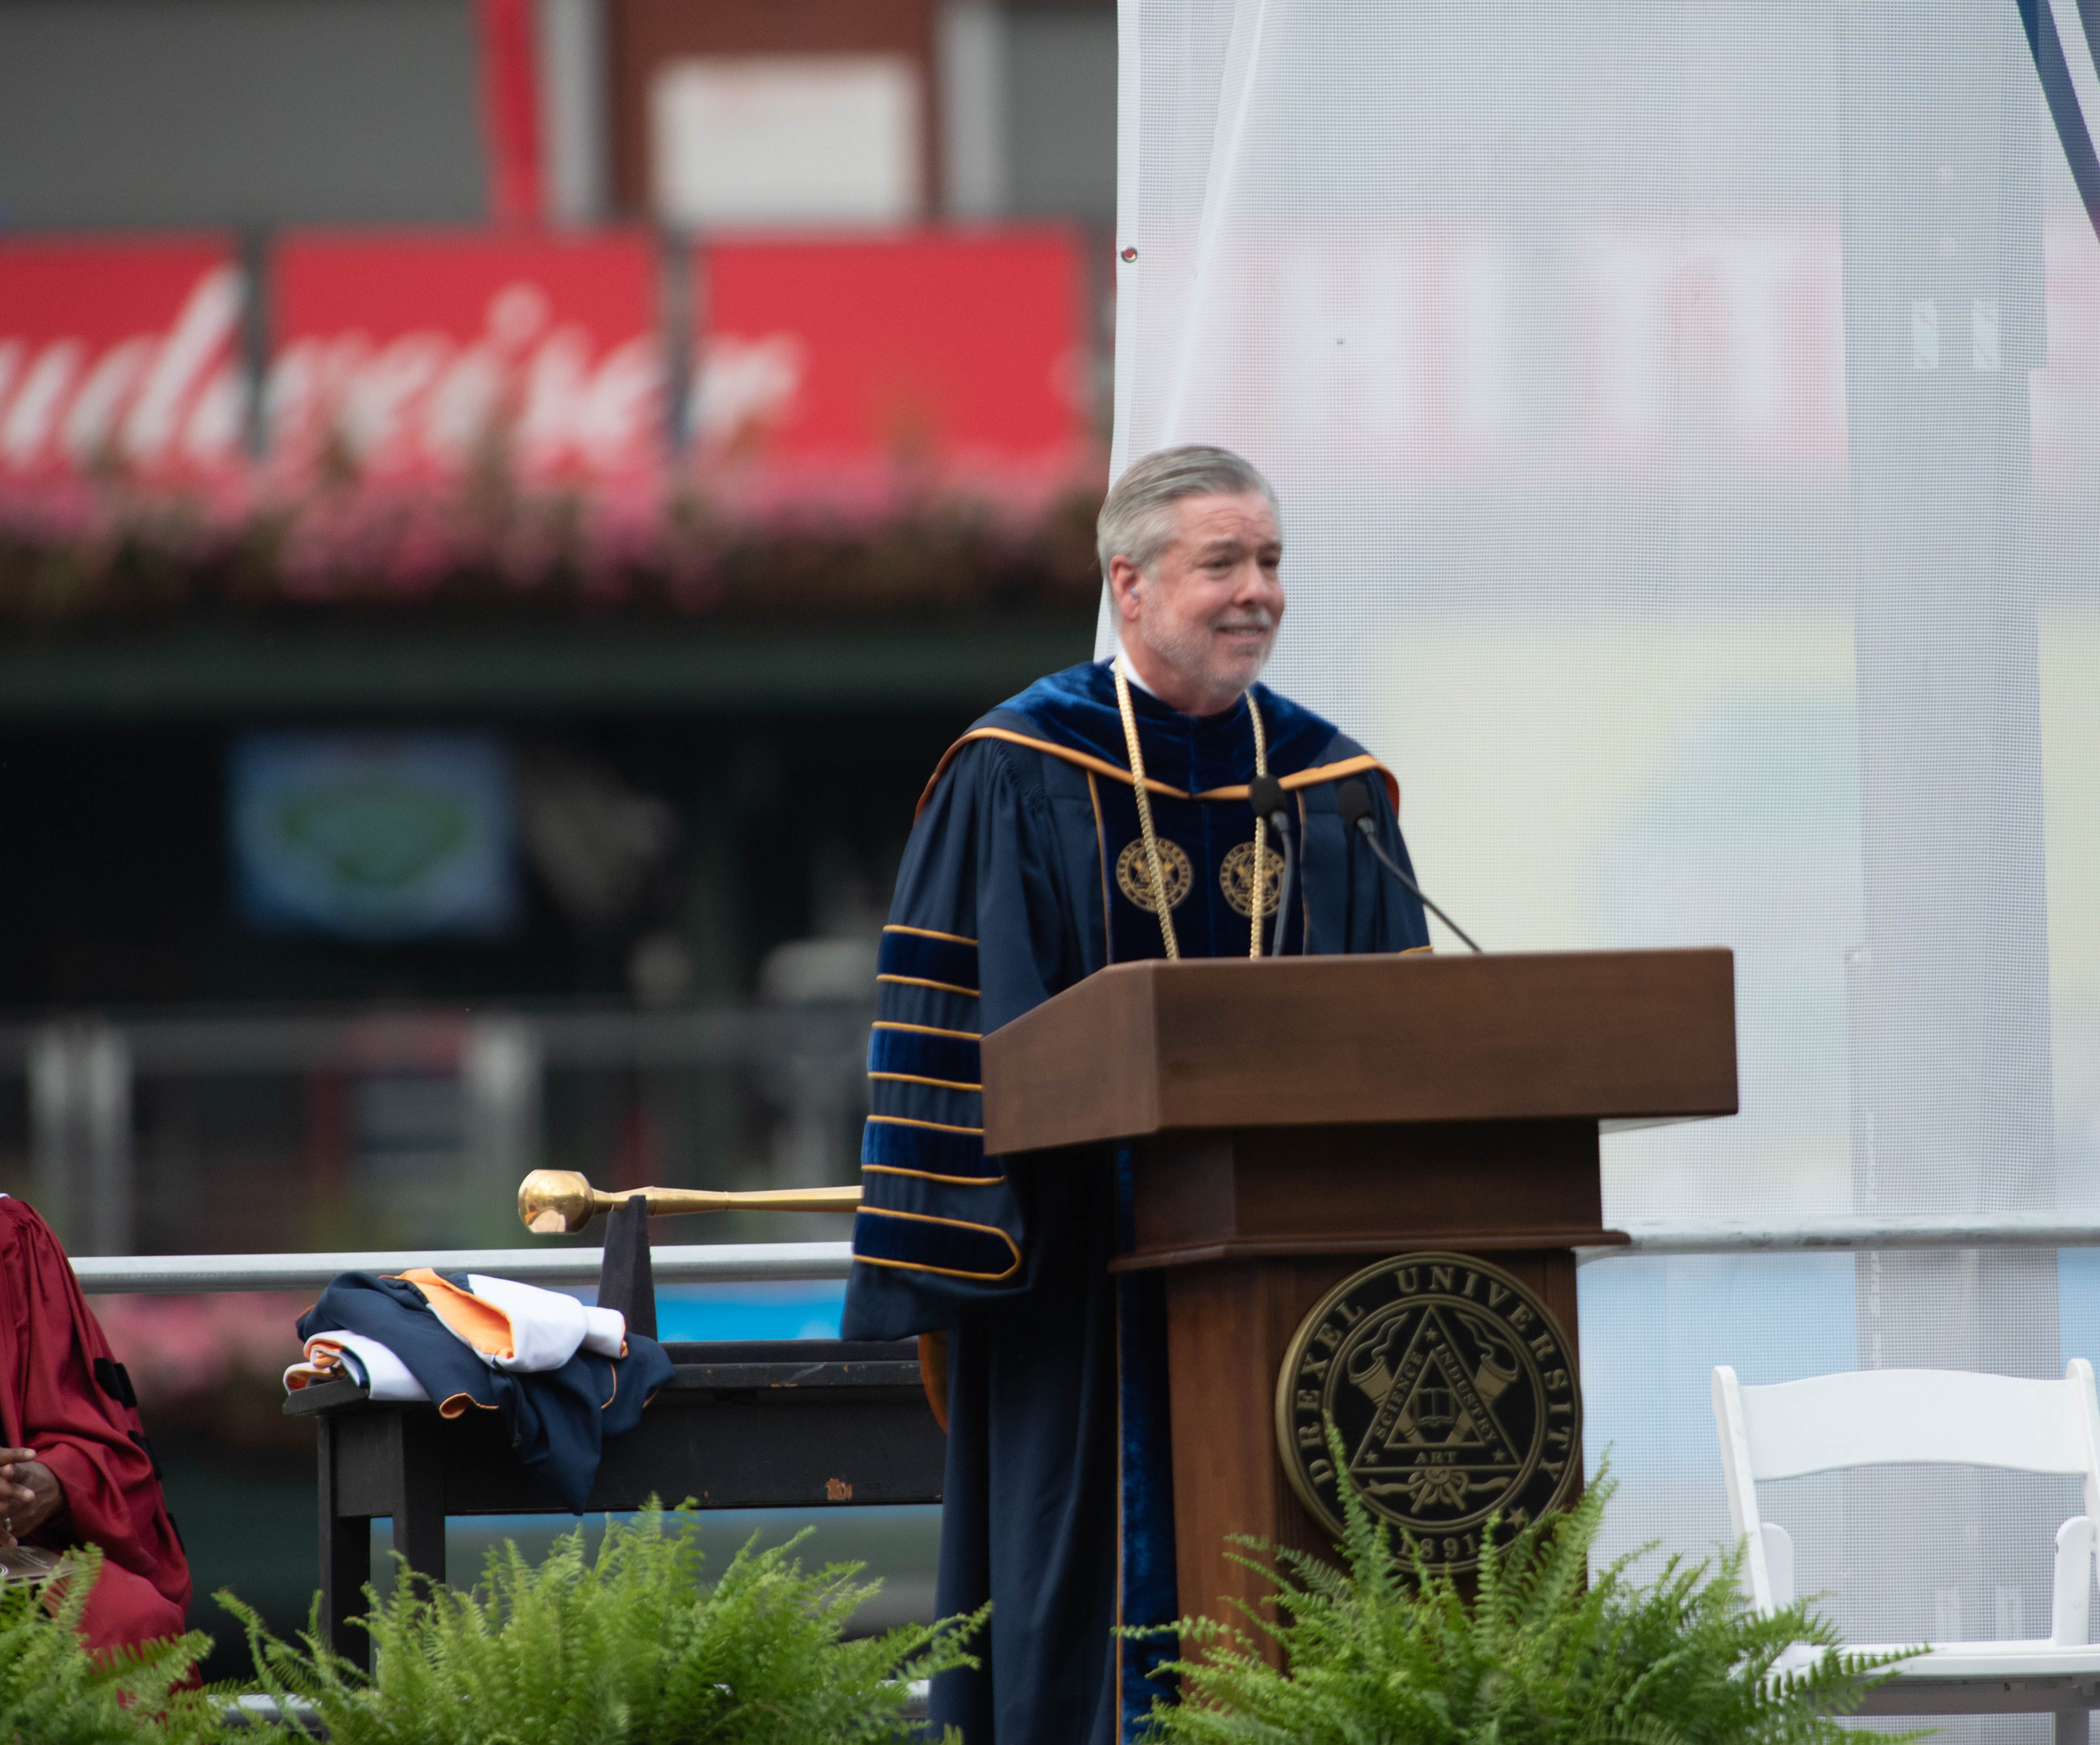 President John Fry at the podium at Commencement.